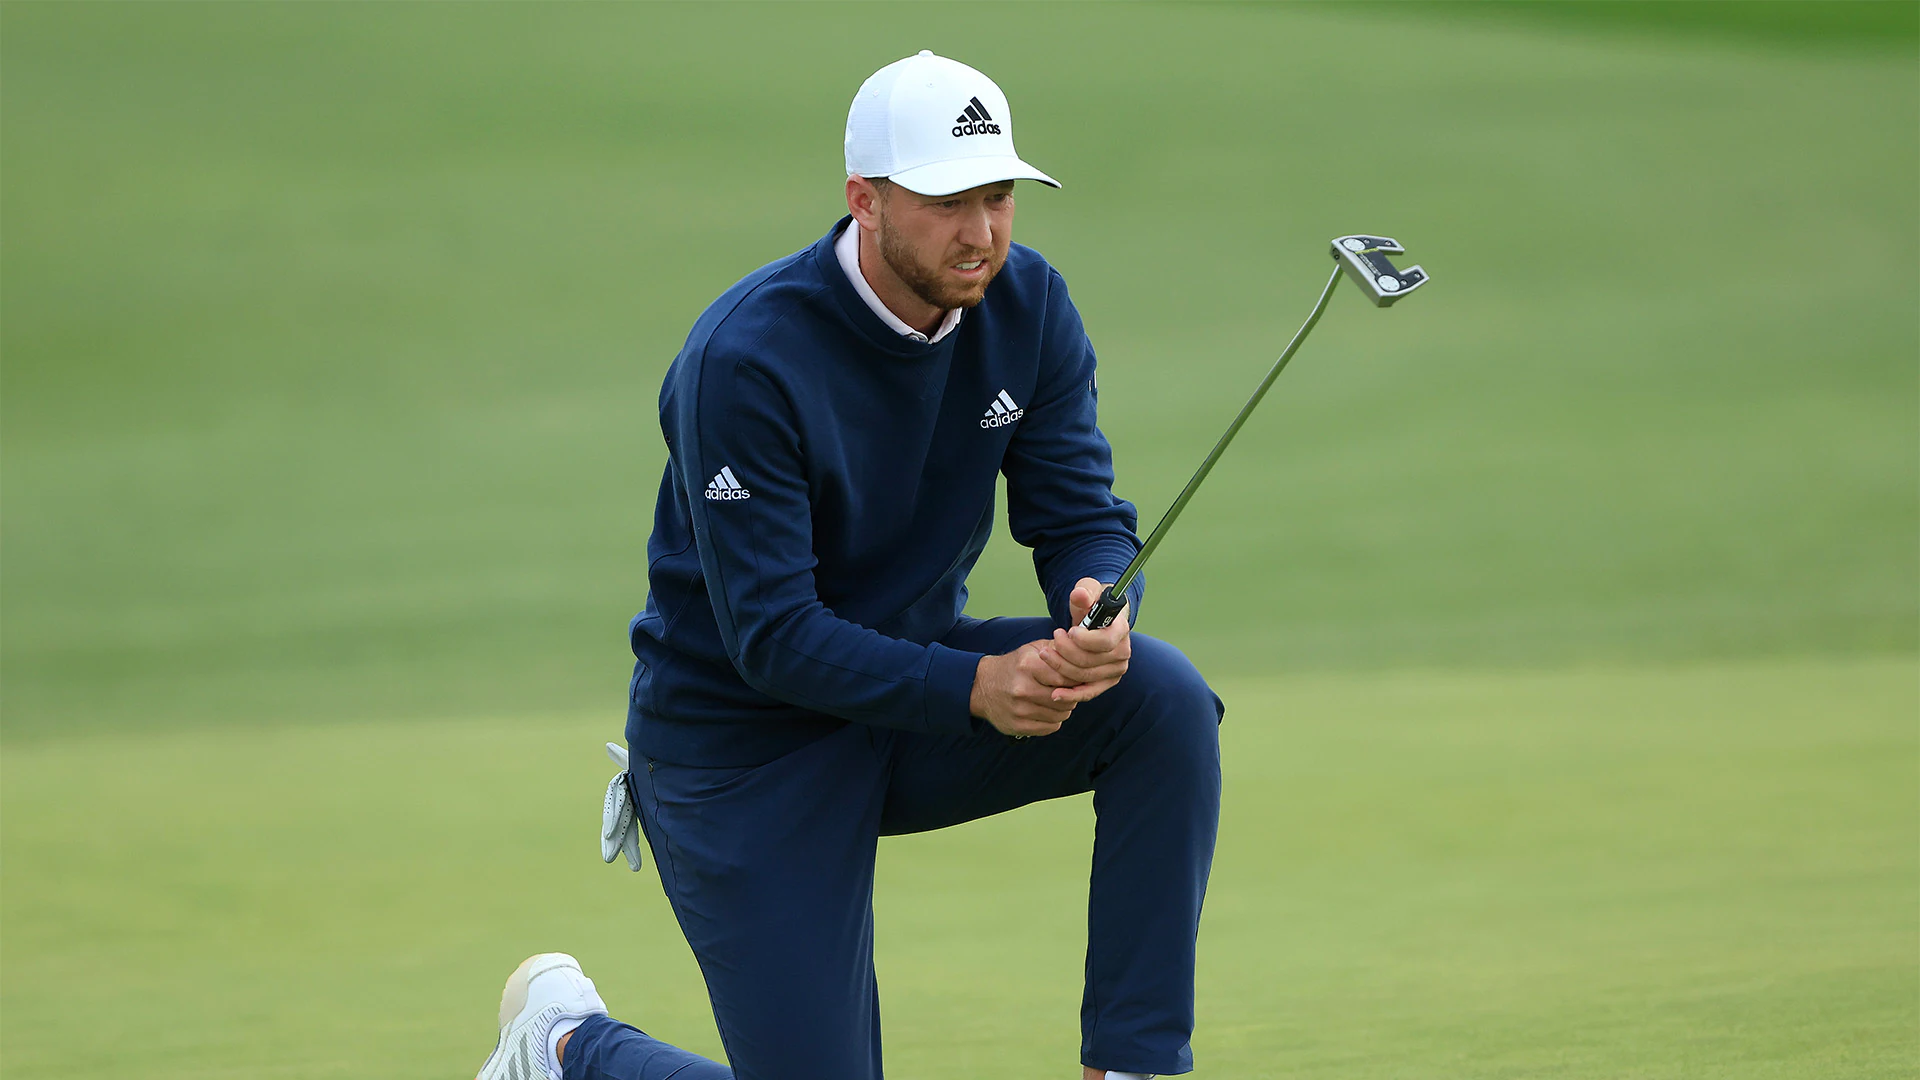 AT&T Pebble Beach Pro-Am defending champion Daniel Berger WDs with injury